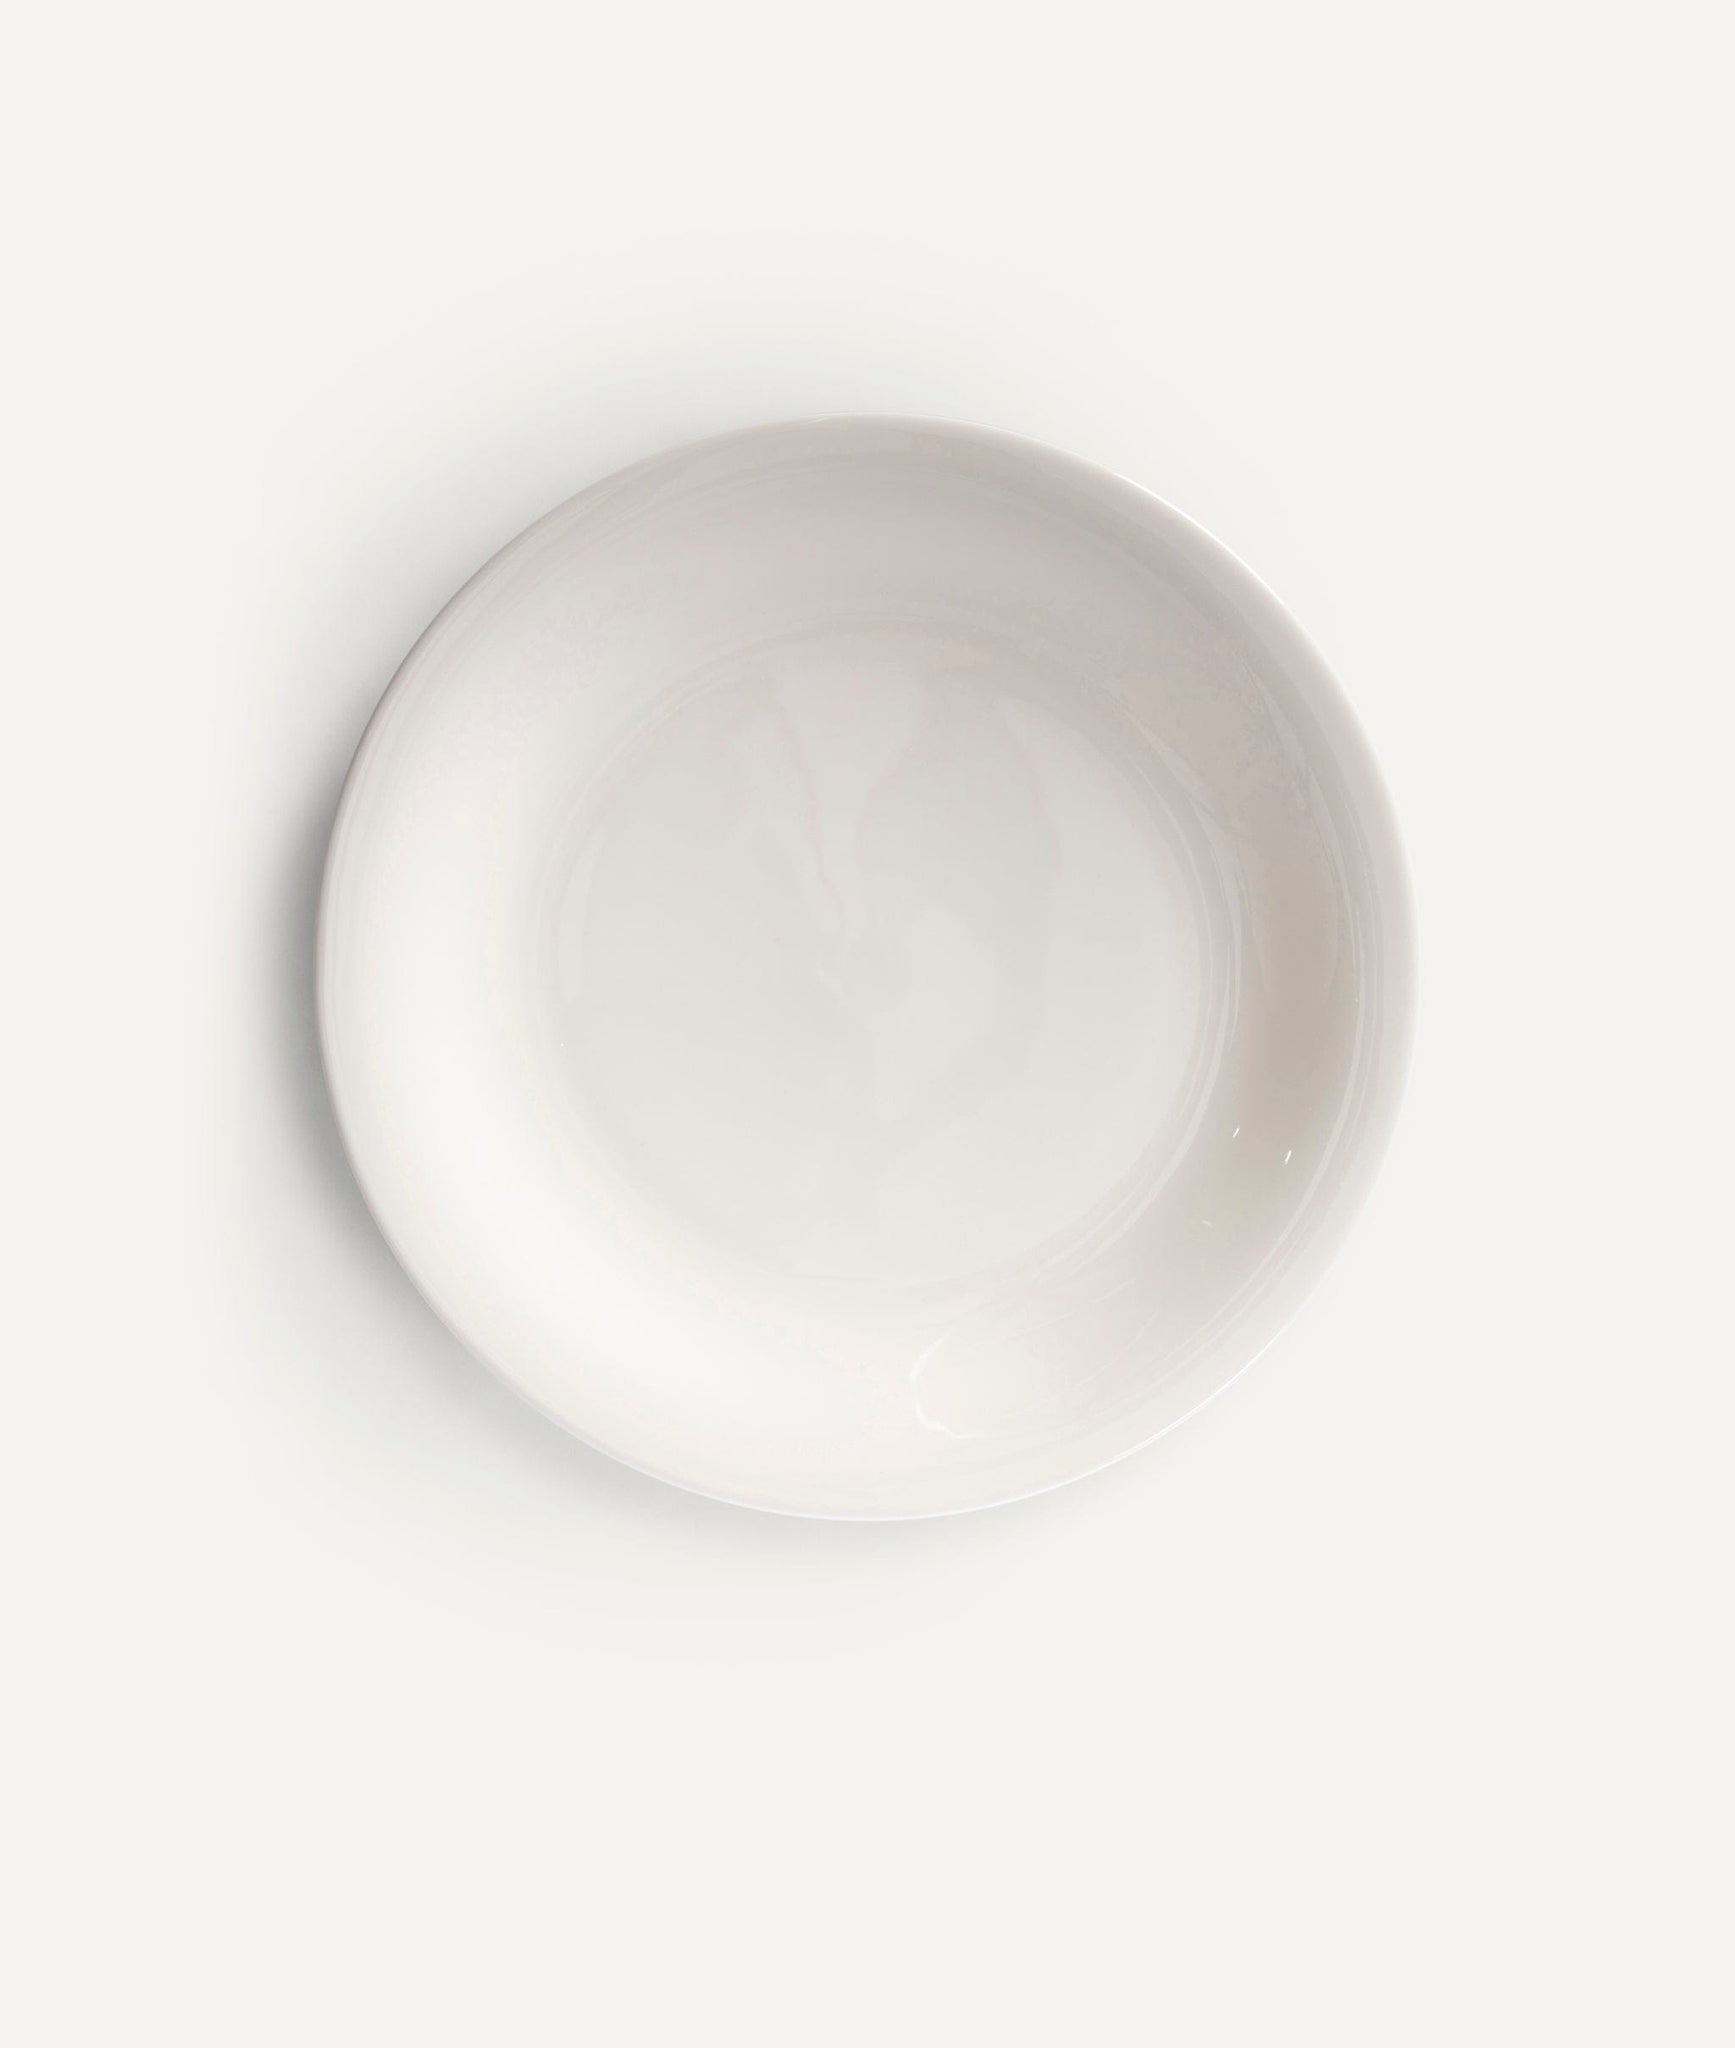 Plate Set "Drop" in Finebone China - 24 Pieces